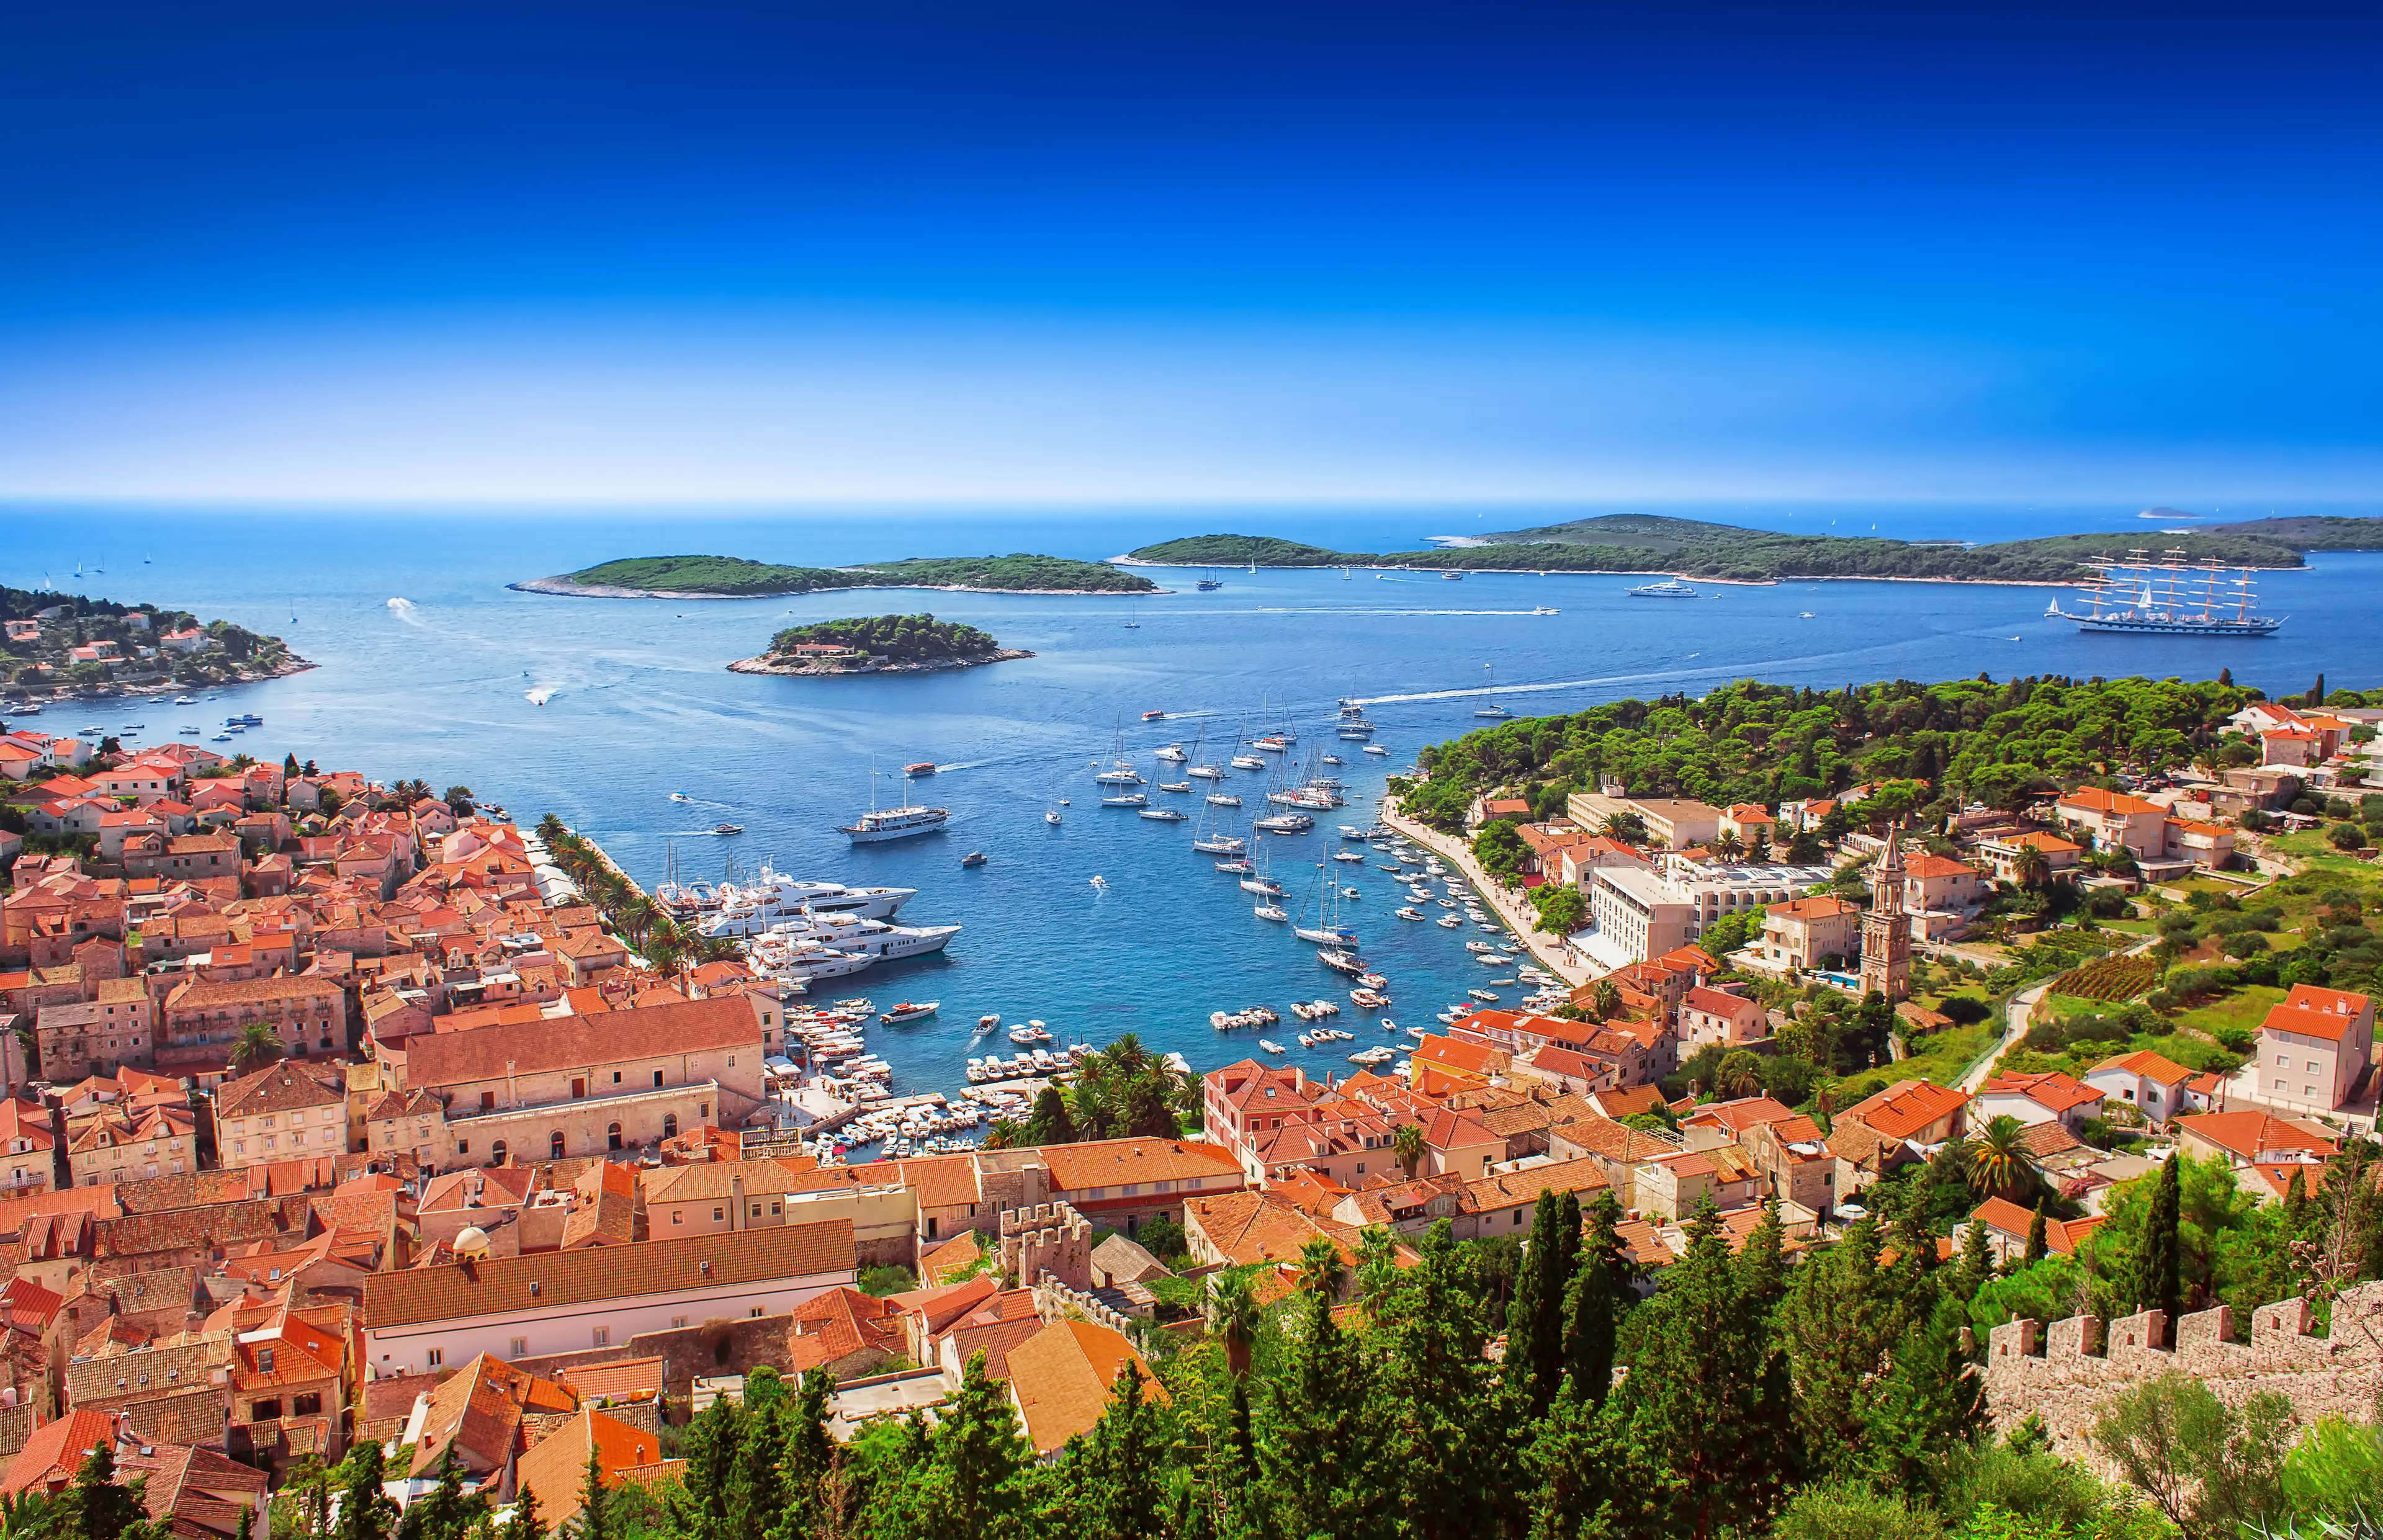 1-Day Sightseeing Tour in Hvar, Croatia